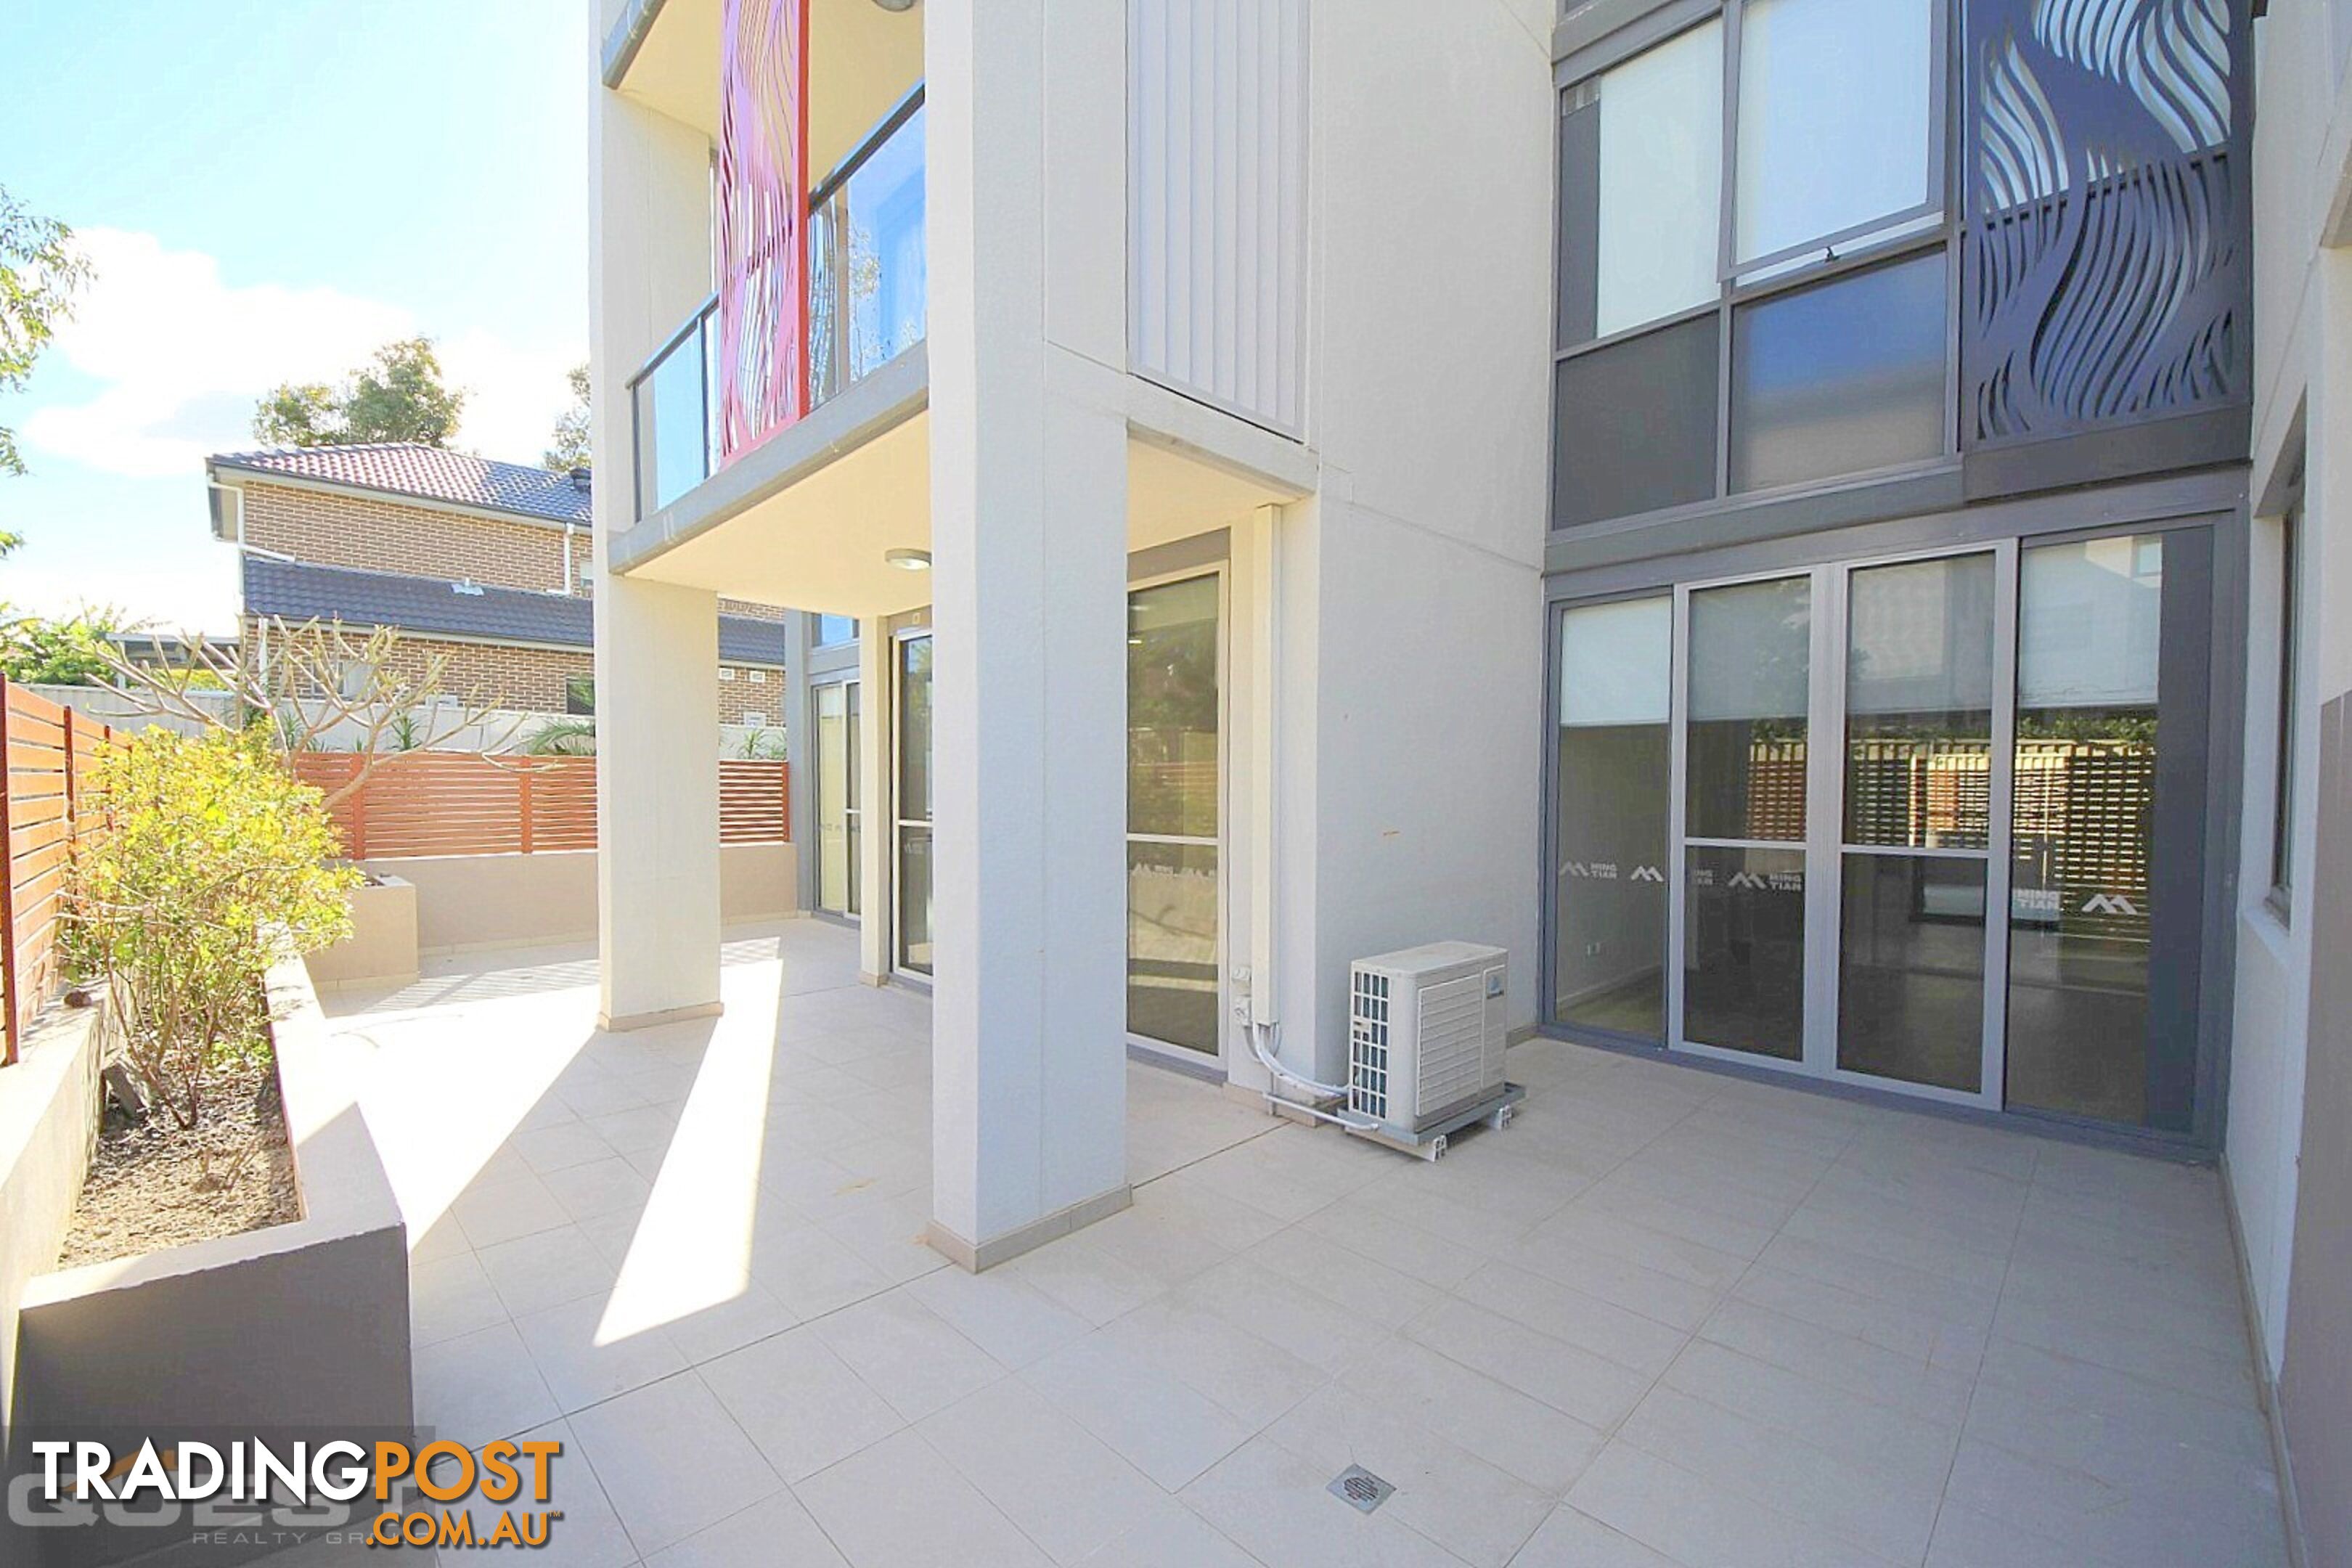 G11/26-36 Cairds Avenue BANKSTOWN NSW 2200